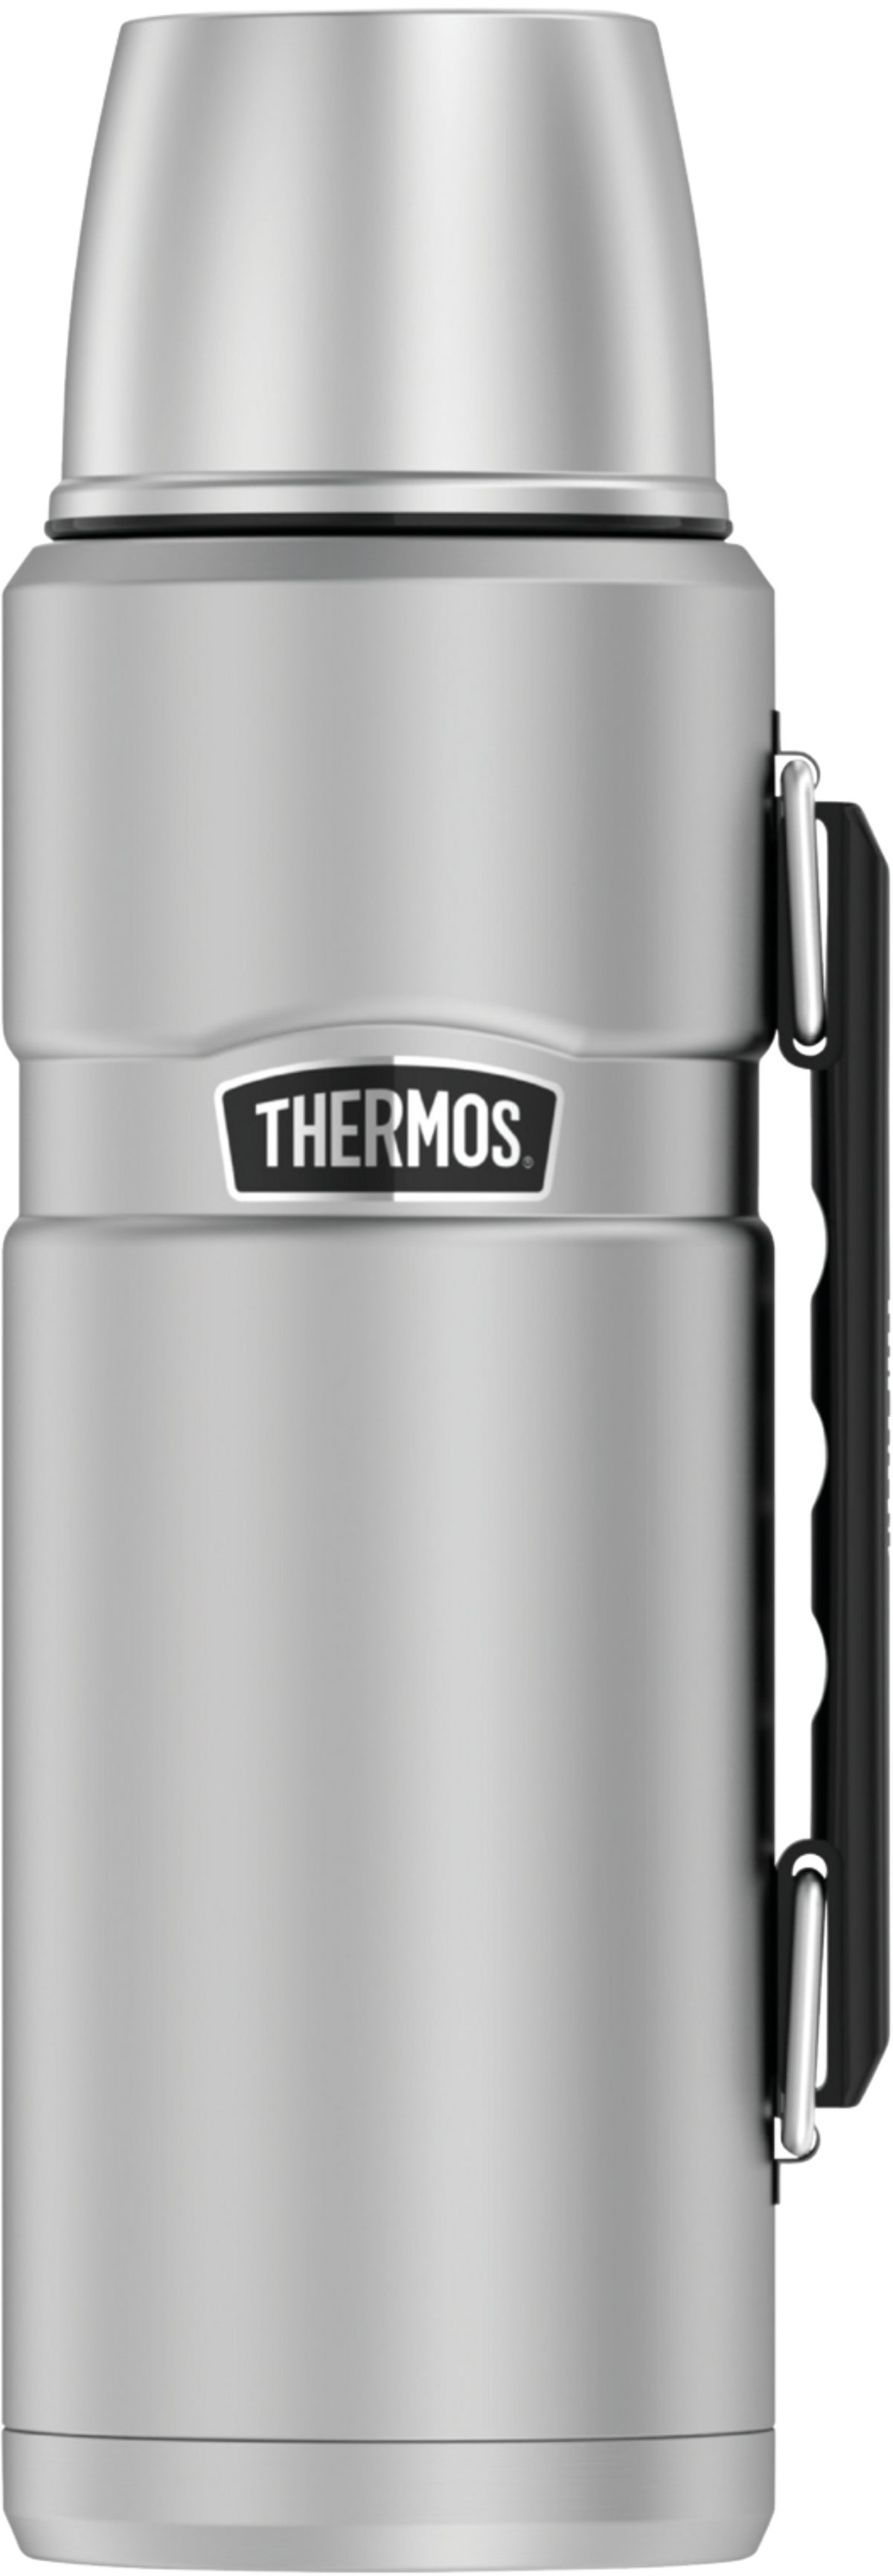 Thermos Stainless King 24 Ounce Drink Bottle, Matte Black